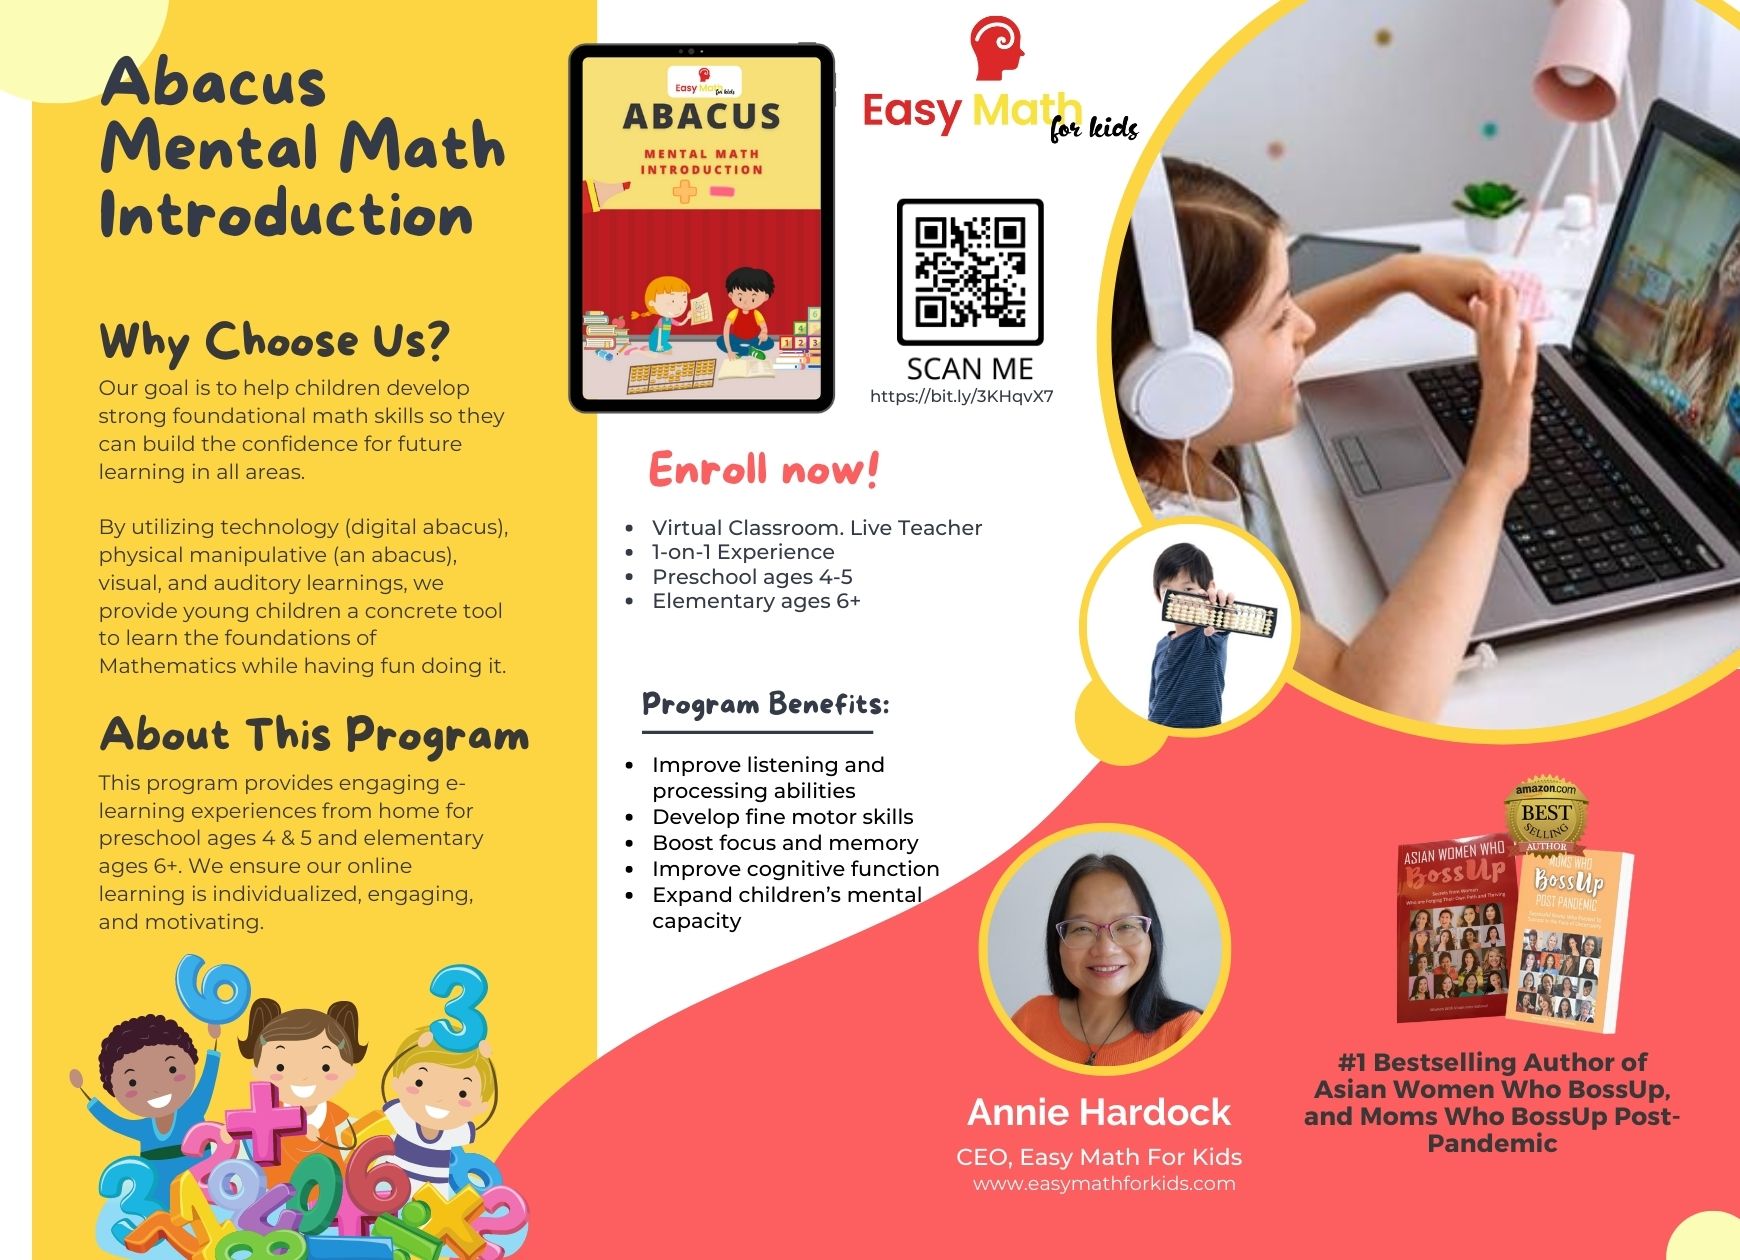 Abacus Mental Math Introduction